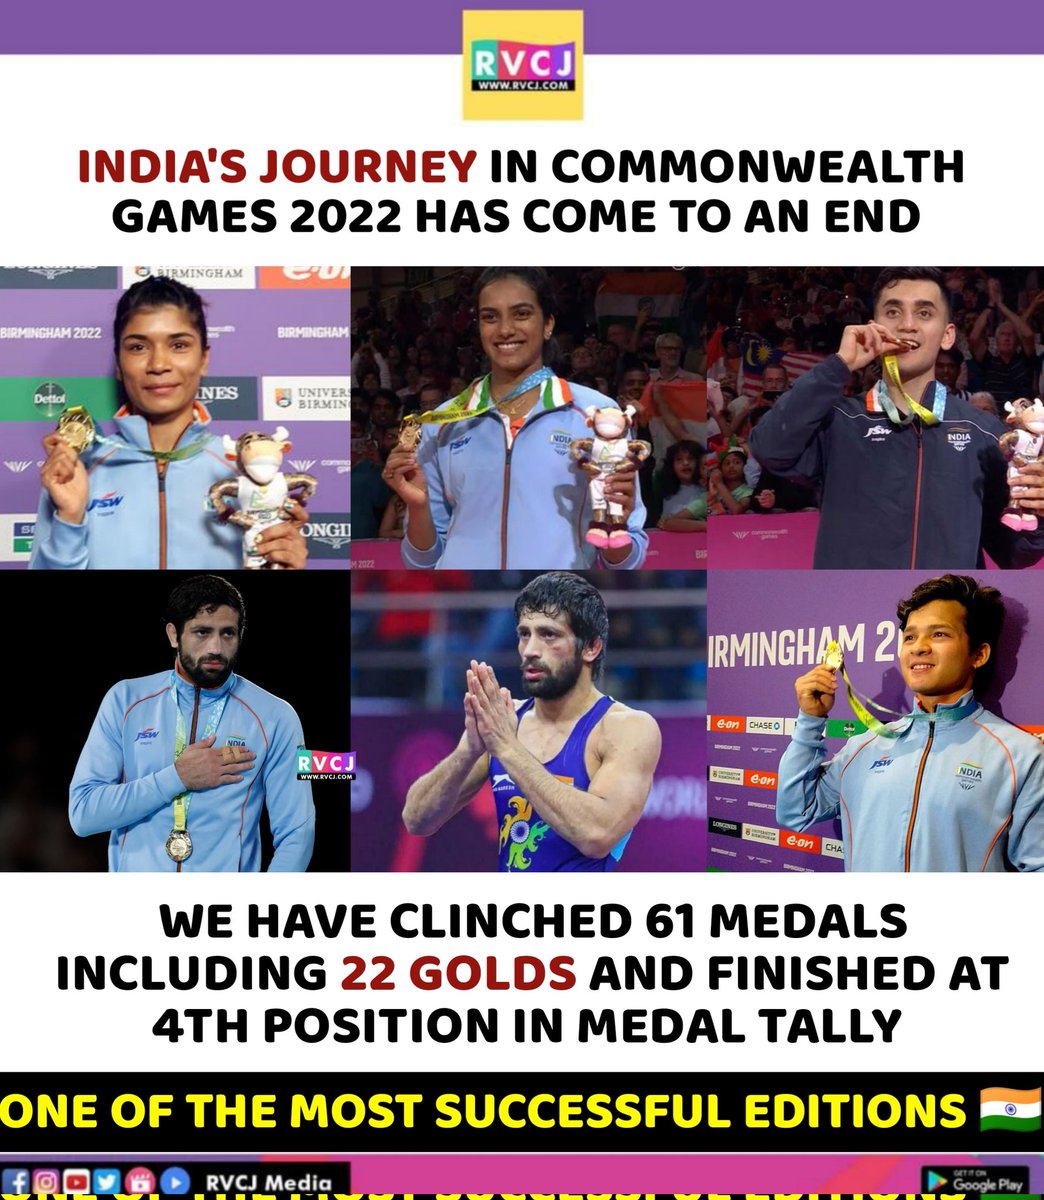 India's journey has come to an end in #CommonwealthGames22